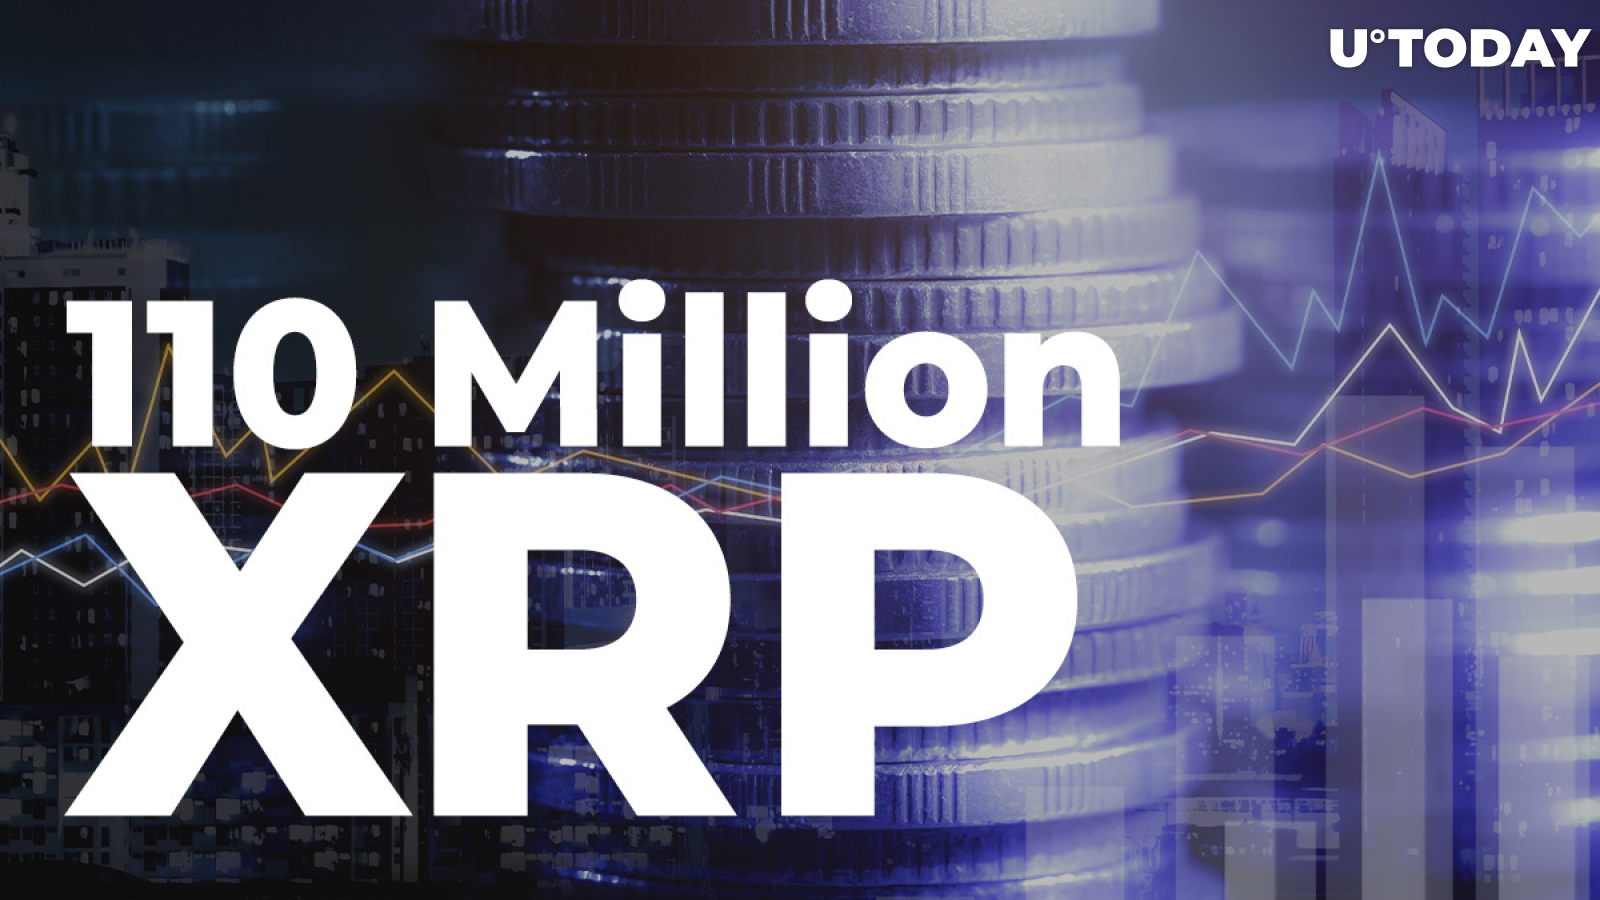 110 Million XRP Transferred by Ripple and Top Asian Crypto Platforms